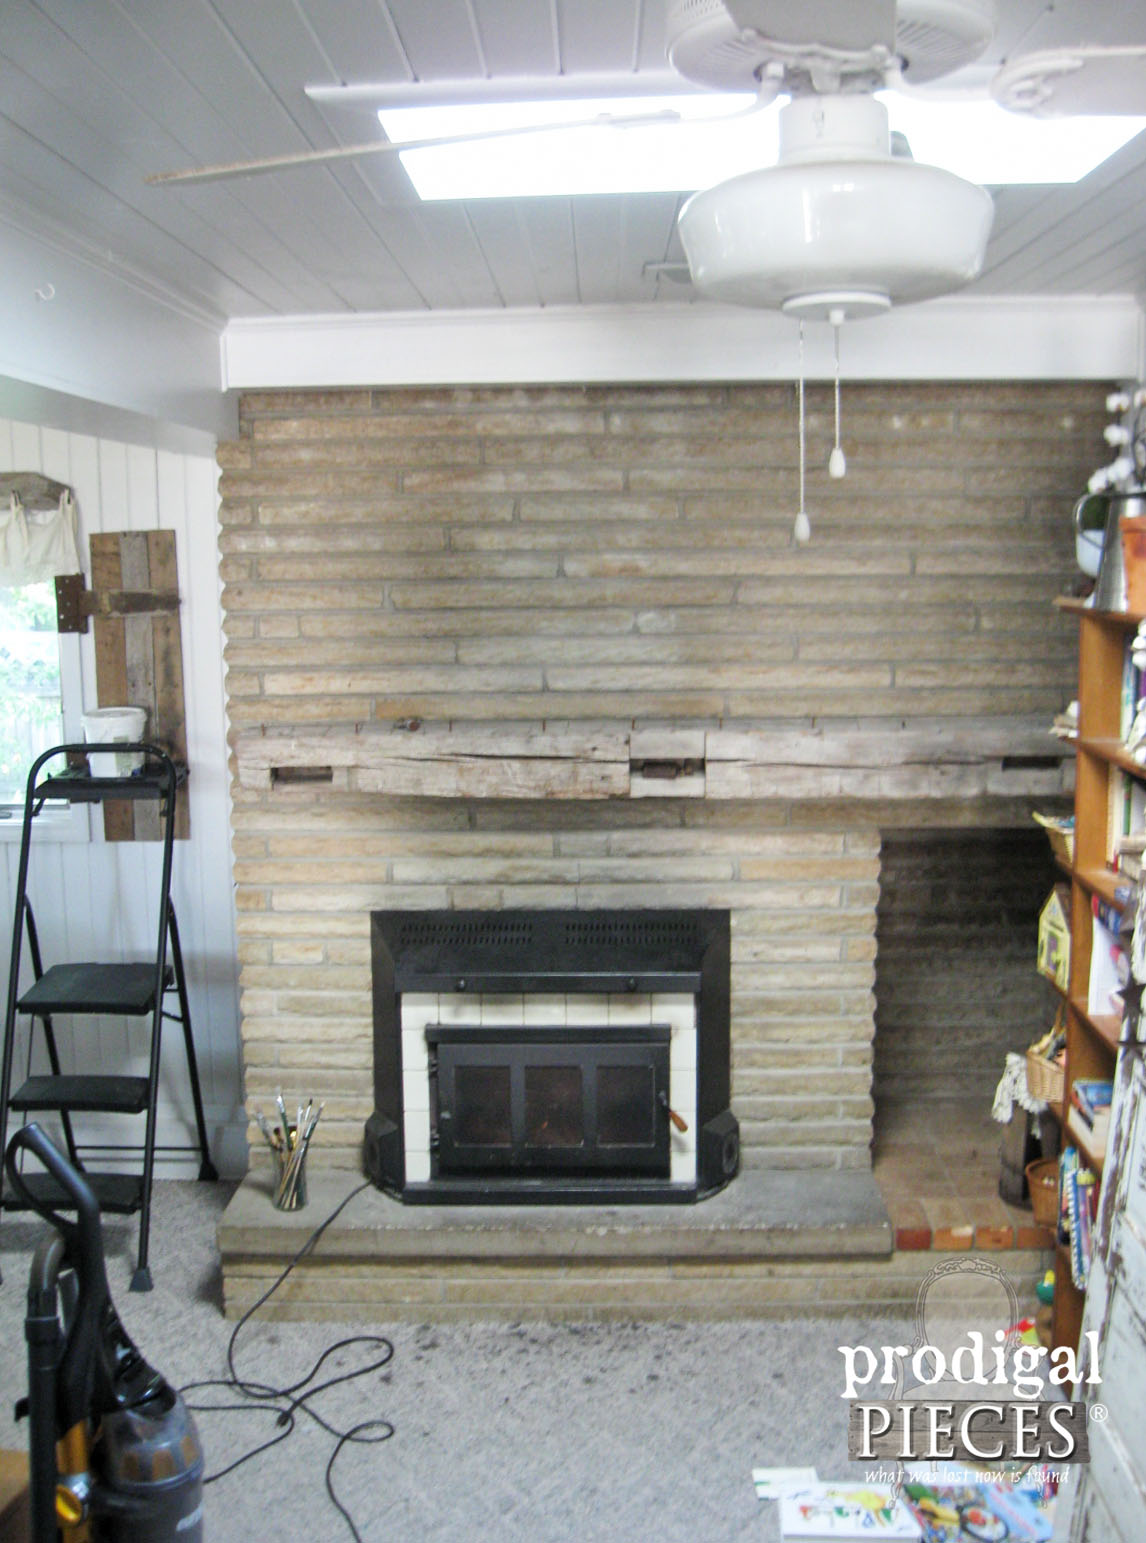 Sandstone Fireplace with Barn Beam Mantel Before | Prodigal Pieces | www.prodigalpieces.com